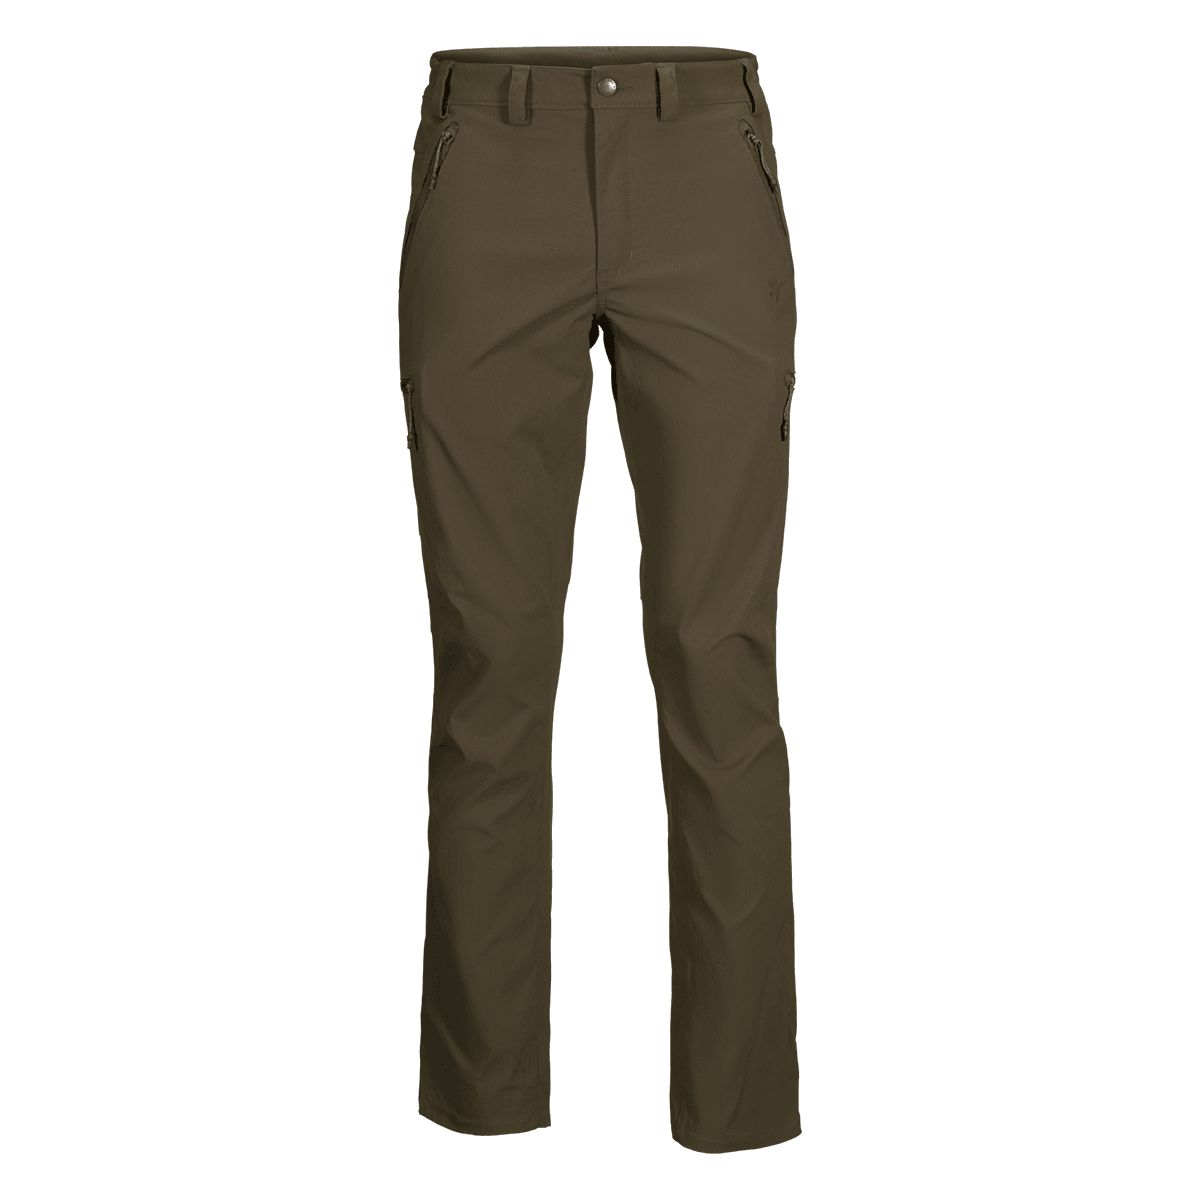 Outdoor Stretch Trousers (M) - pikkorisport